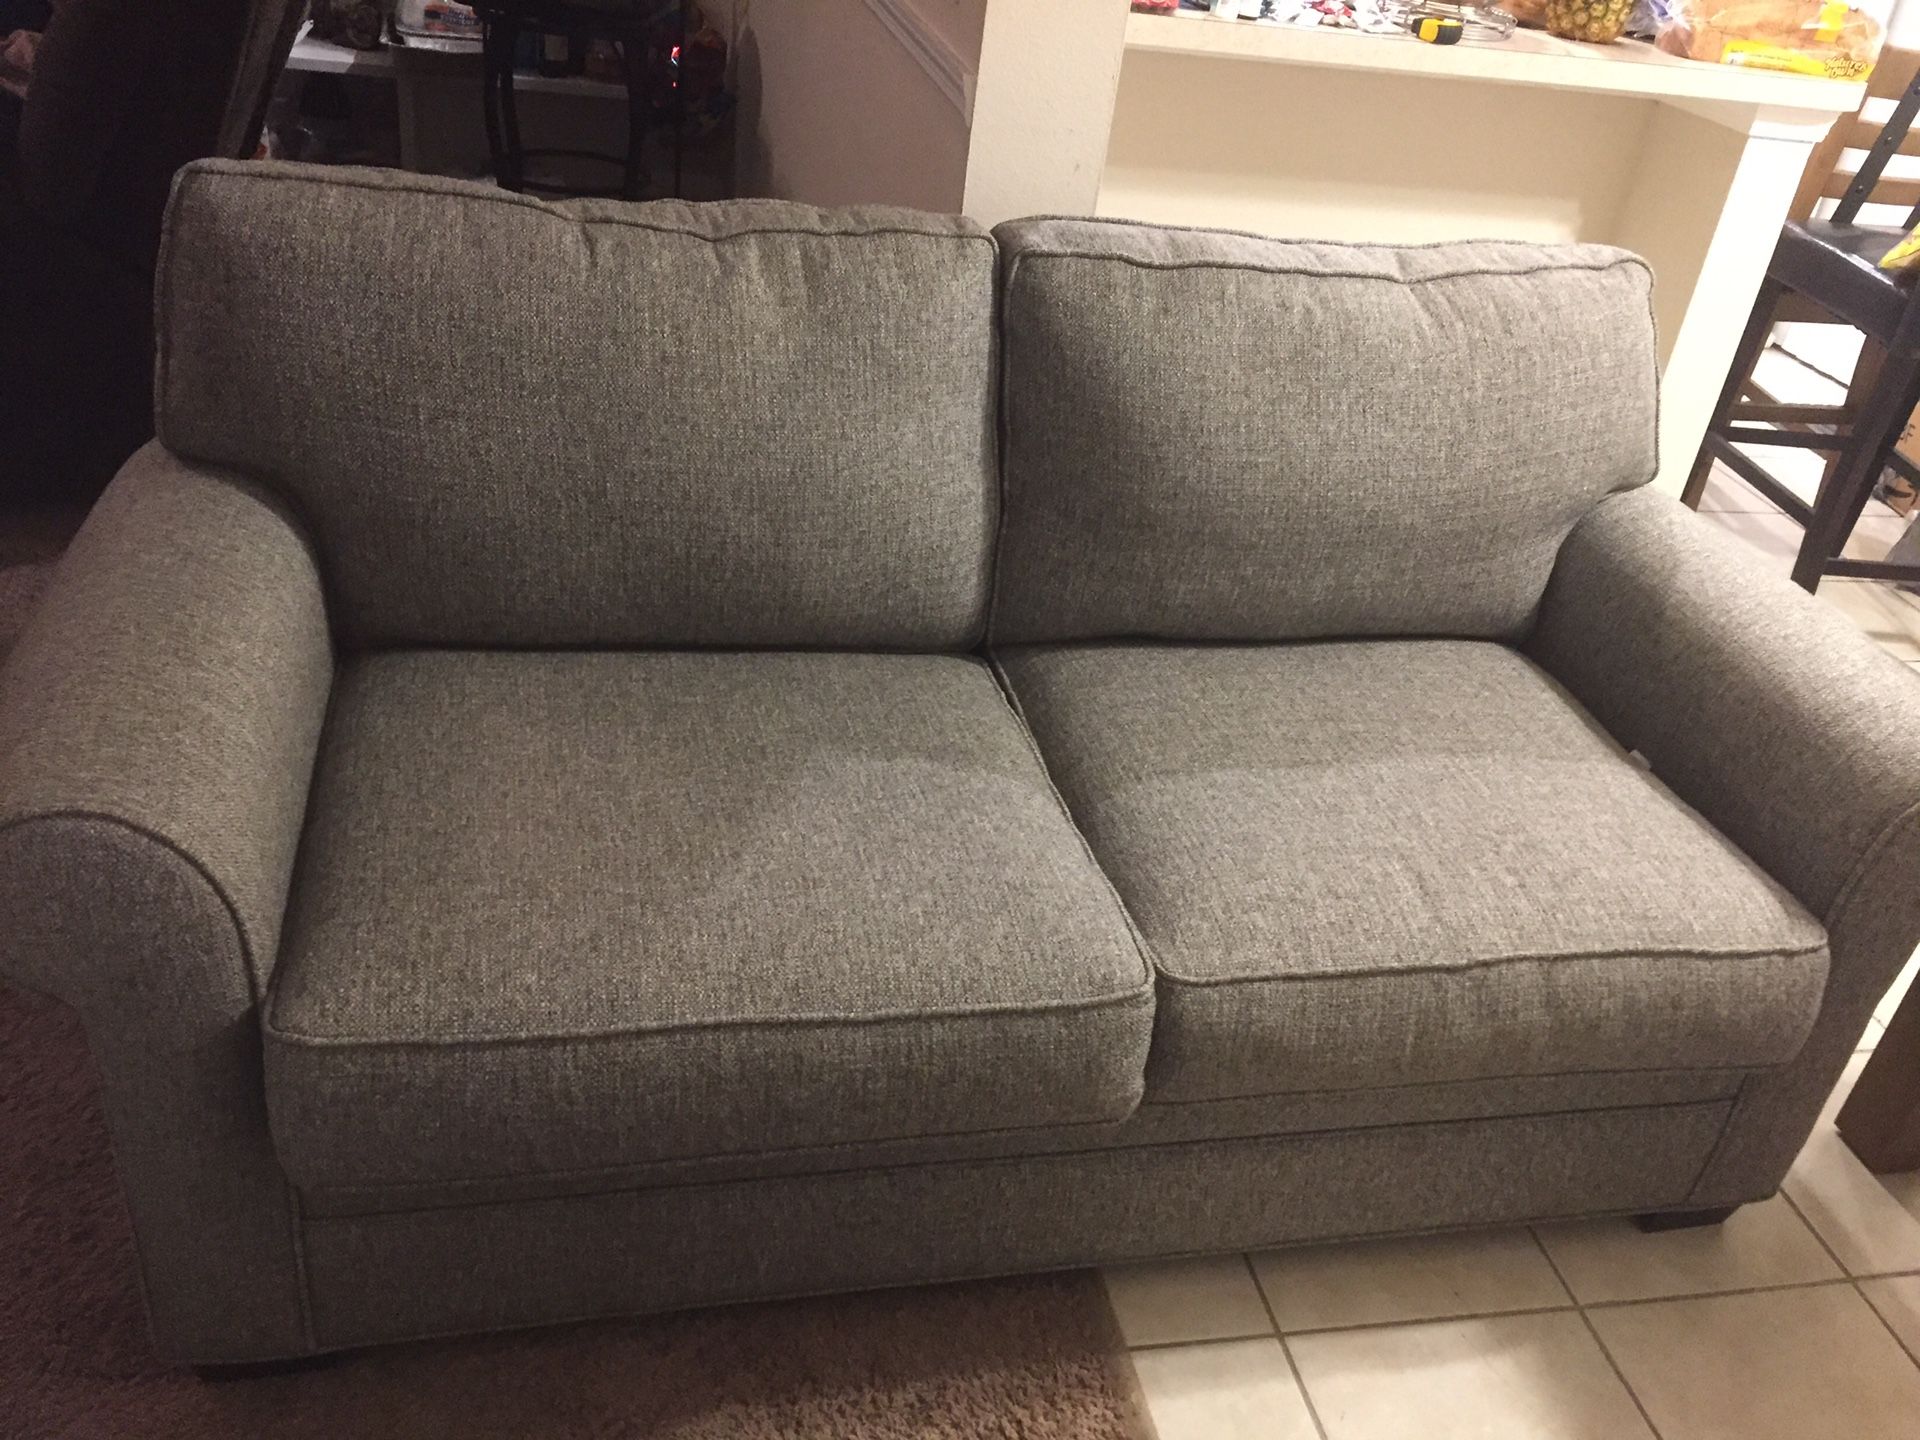 Beautiful Ashley’s sofa/love seat in perfect condition, like new. Gray color.